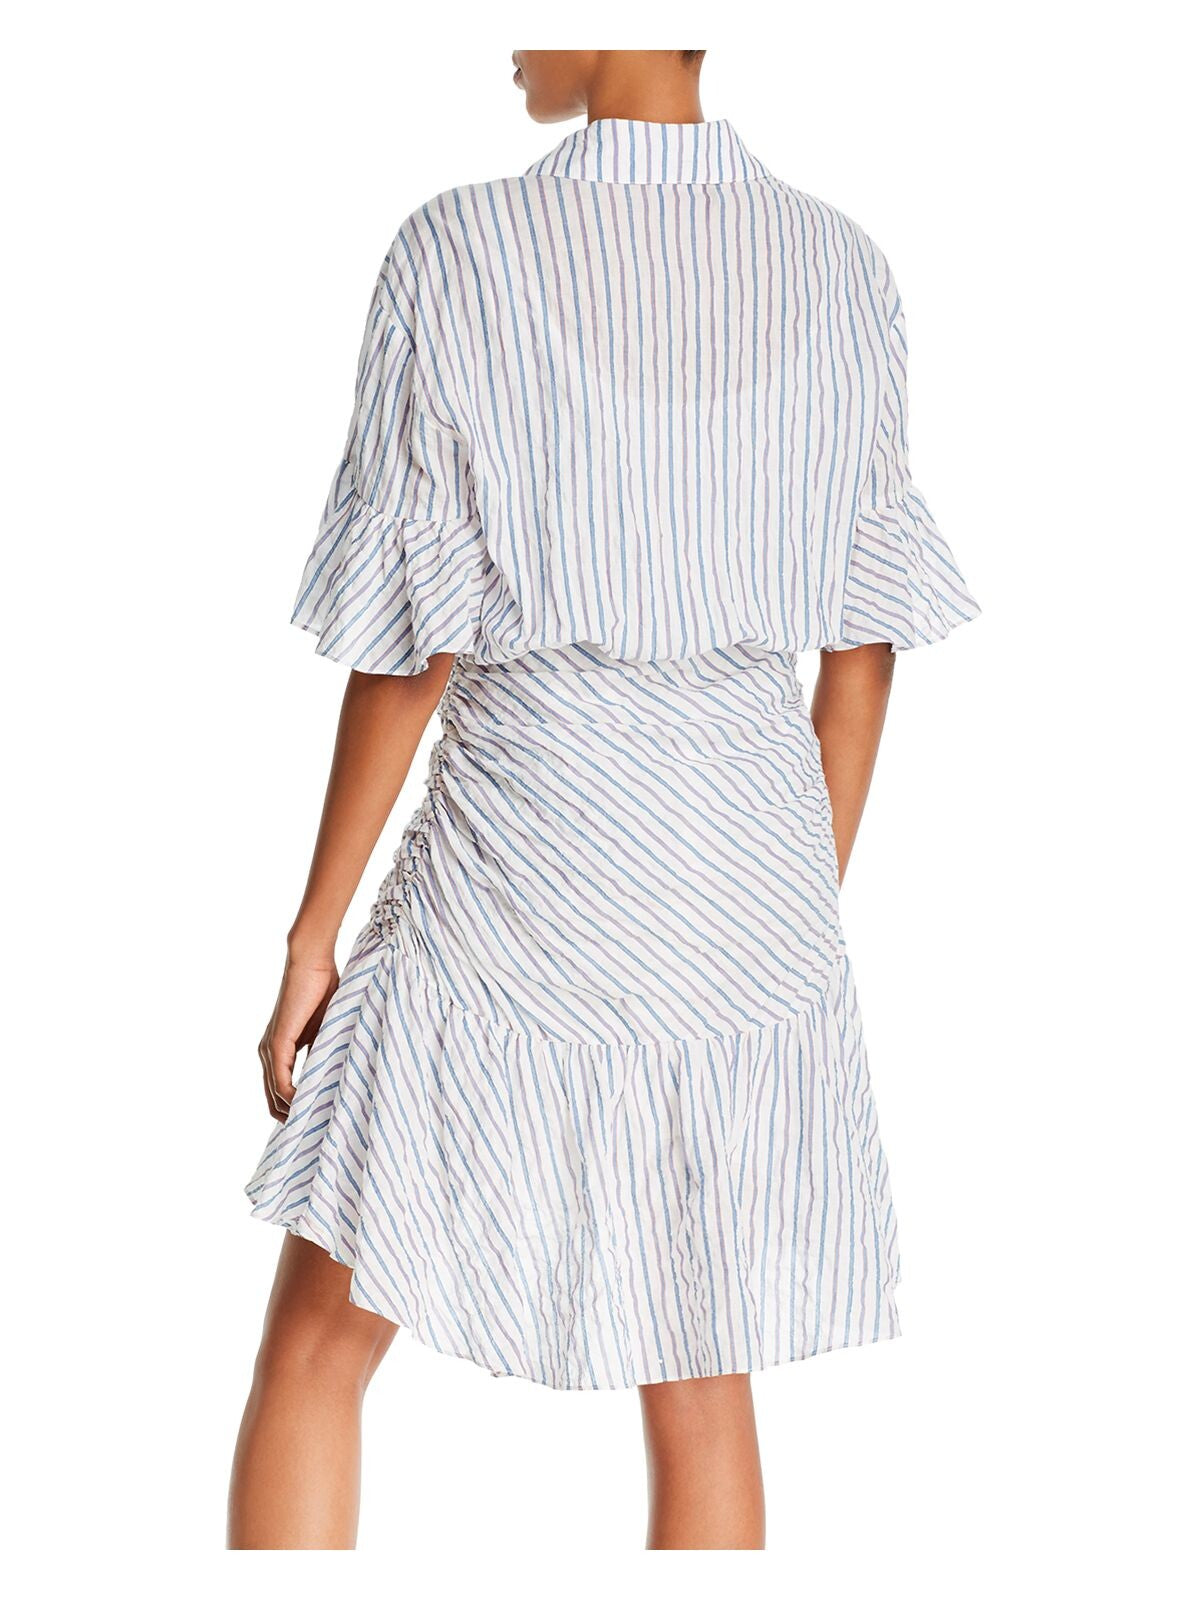 CINQ A SEPT Womens White Ruched Ruffled Button Front Lined Striped Short Sleeve Point Collar Knee Length Hi-Lo Dress 0